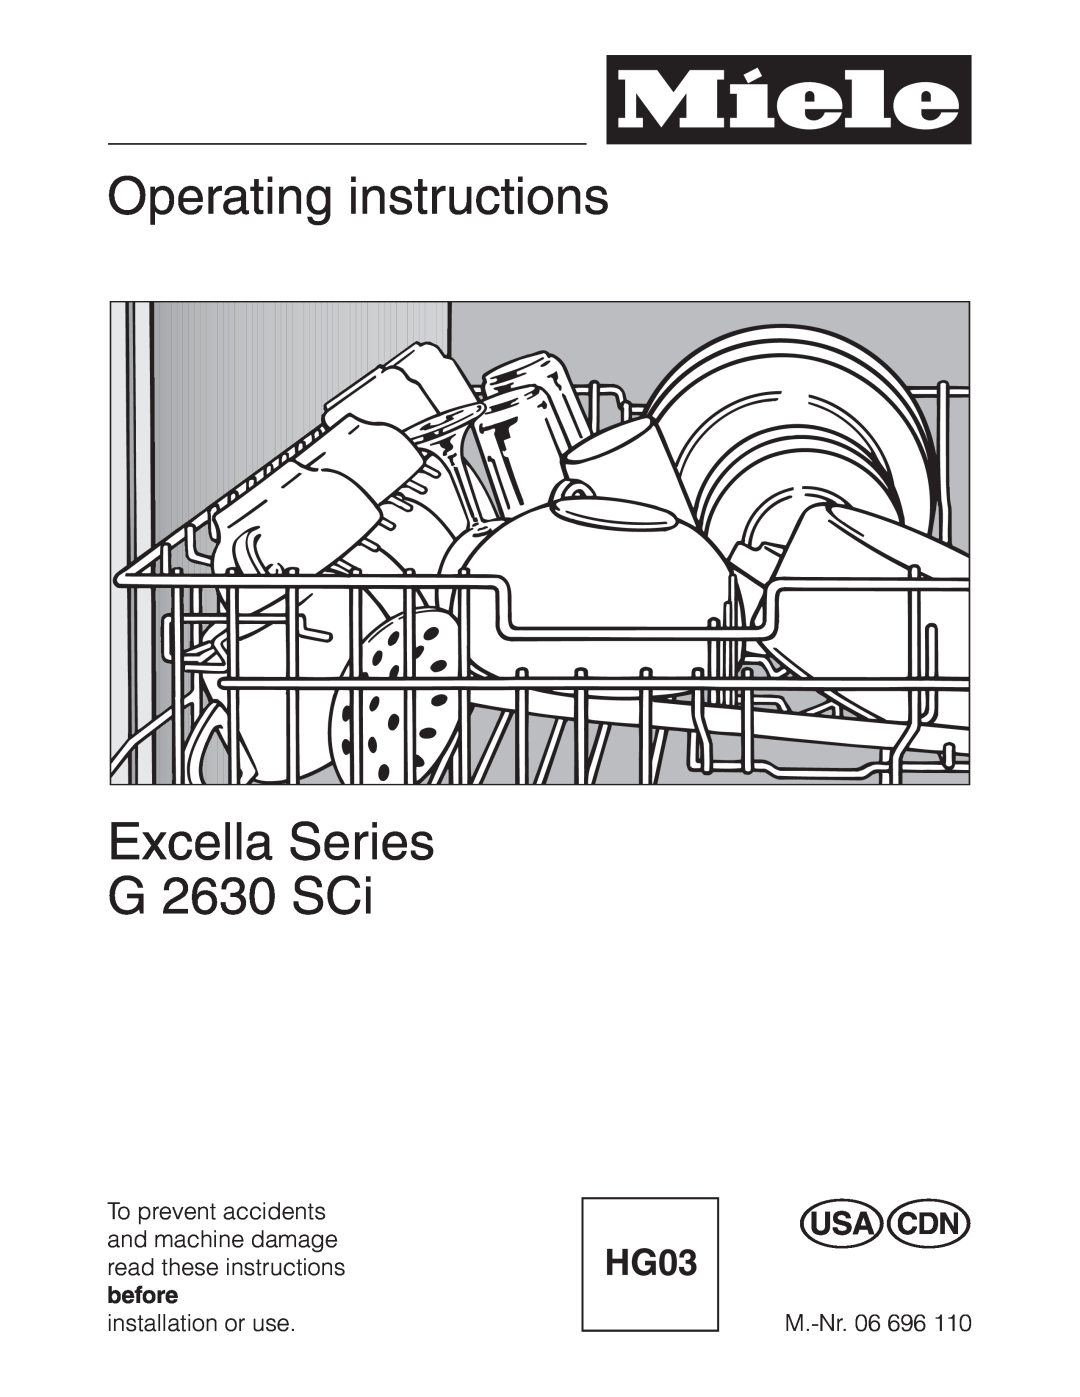 Miele G 2630 SCI manual Operating instructions Excella Series G 2630 SCi 